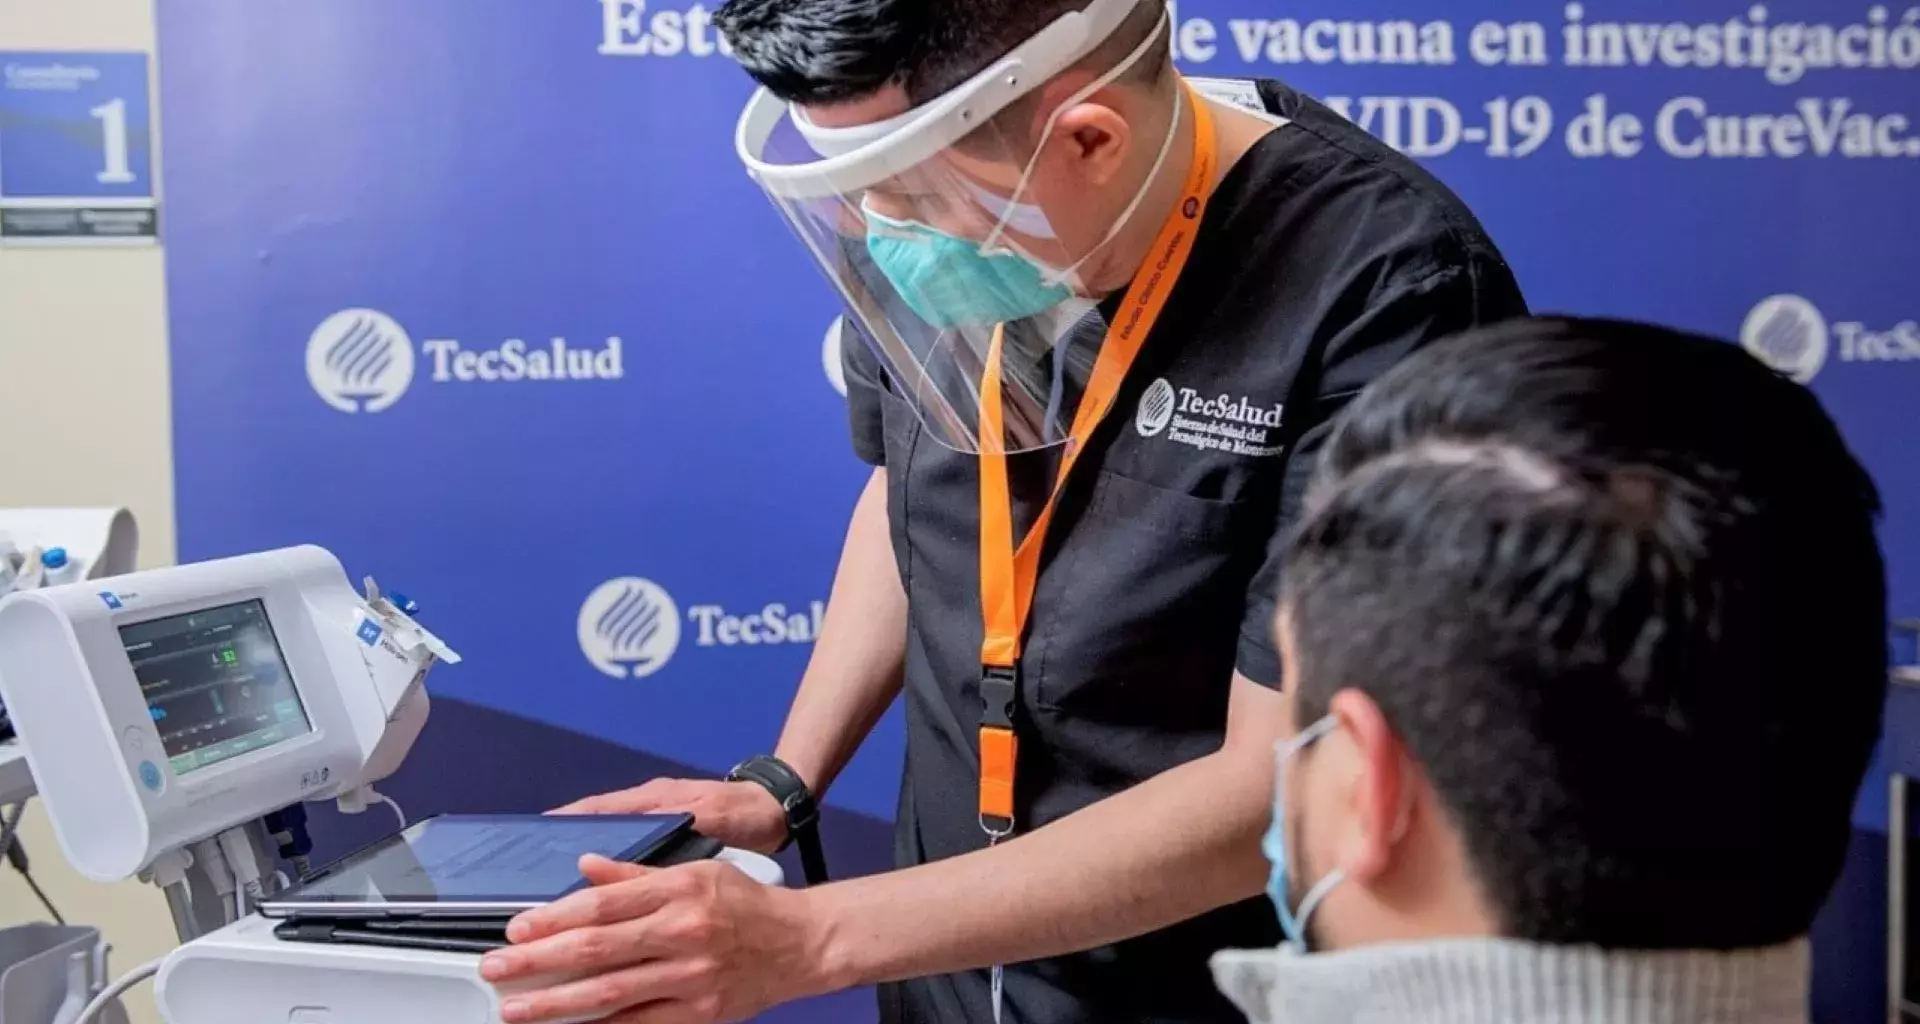 Mexican CureVac vaccine studies move ahead with TecSalud